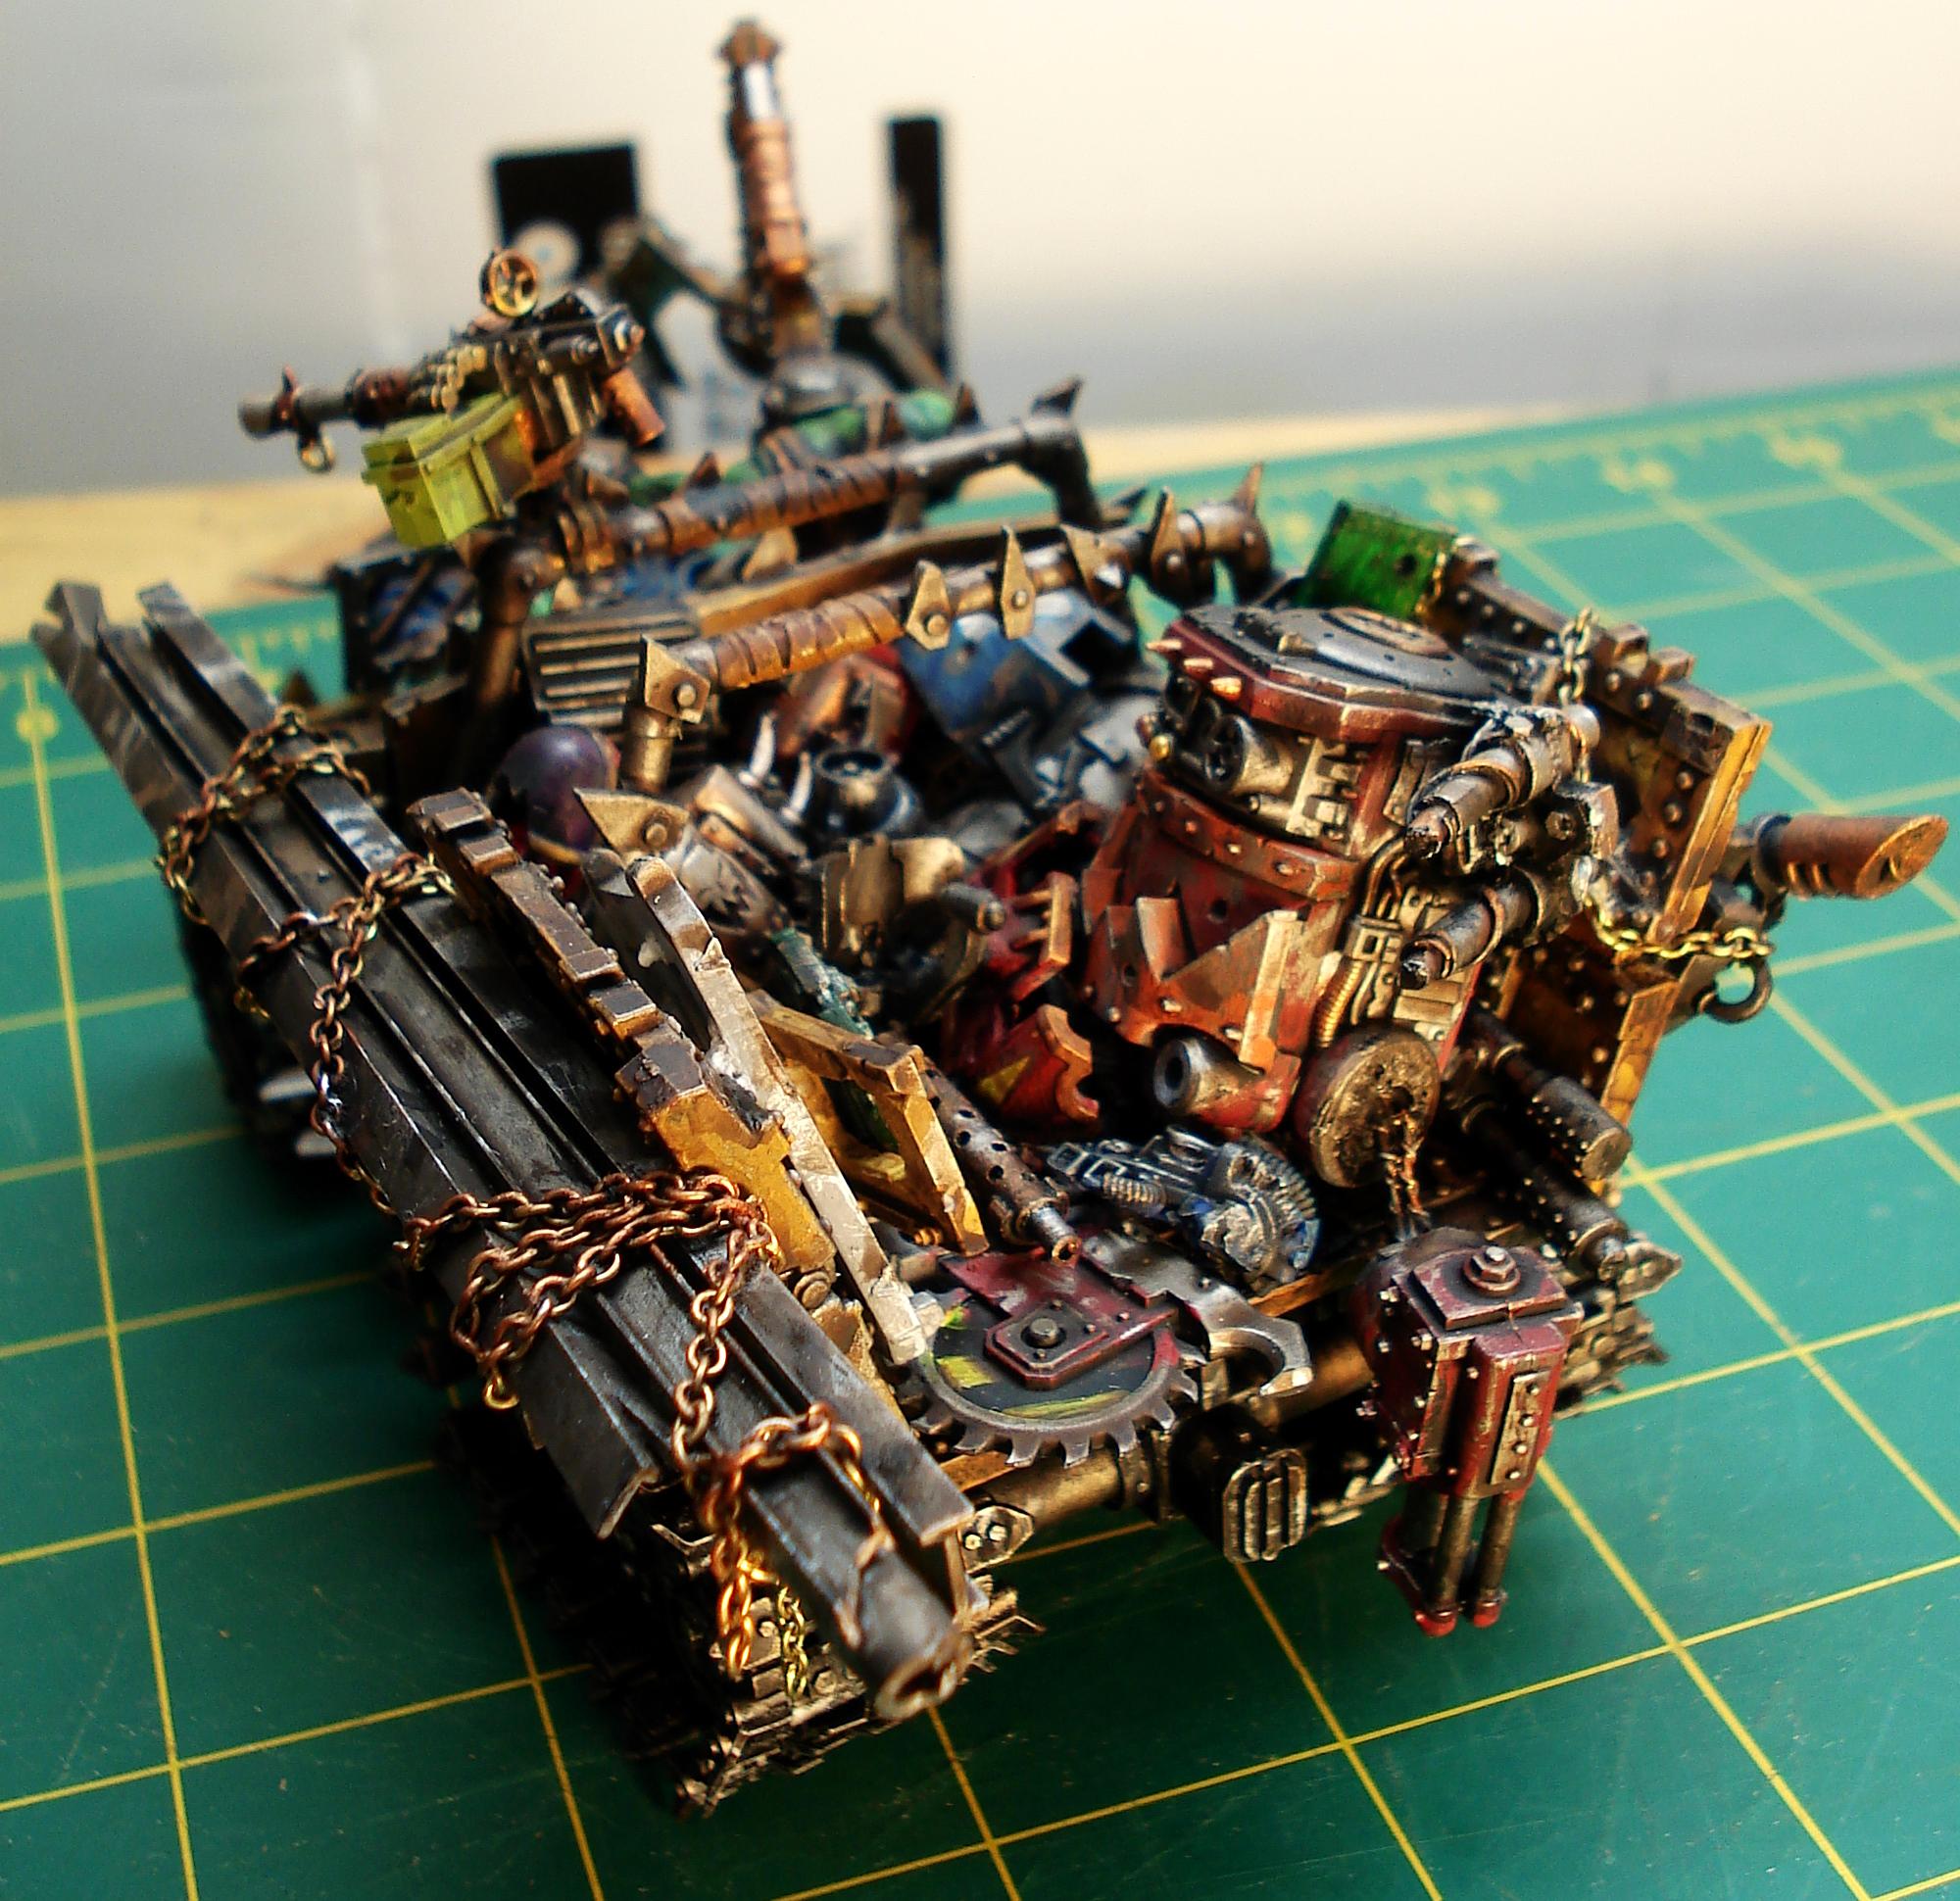 Bad, Claw, Comission, Custom, Deff, Dreadnought, Field, Force, Kustom, Moons, Orks, Scrap, Space, Space Marines, Truk